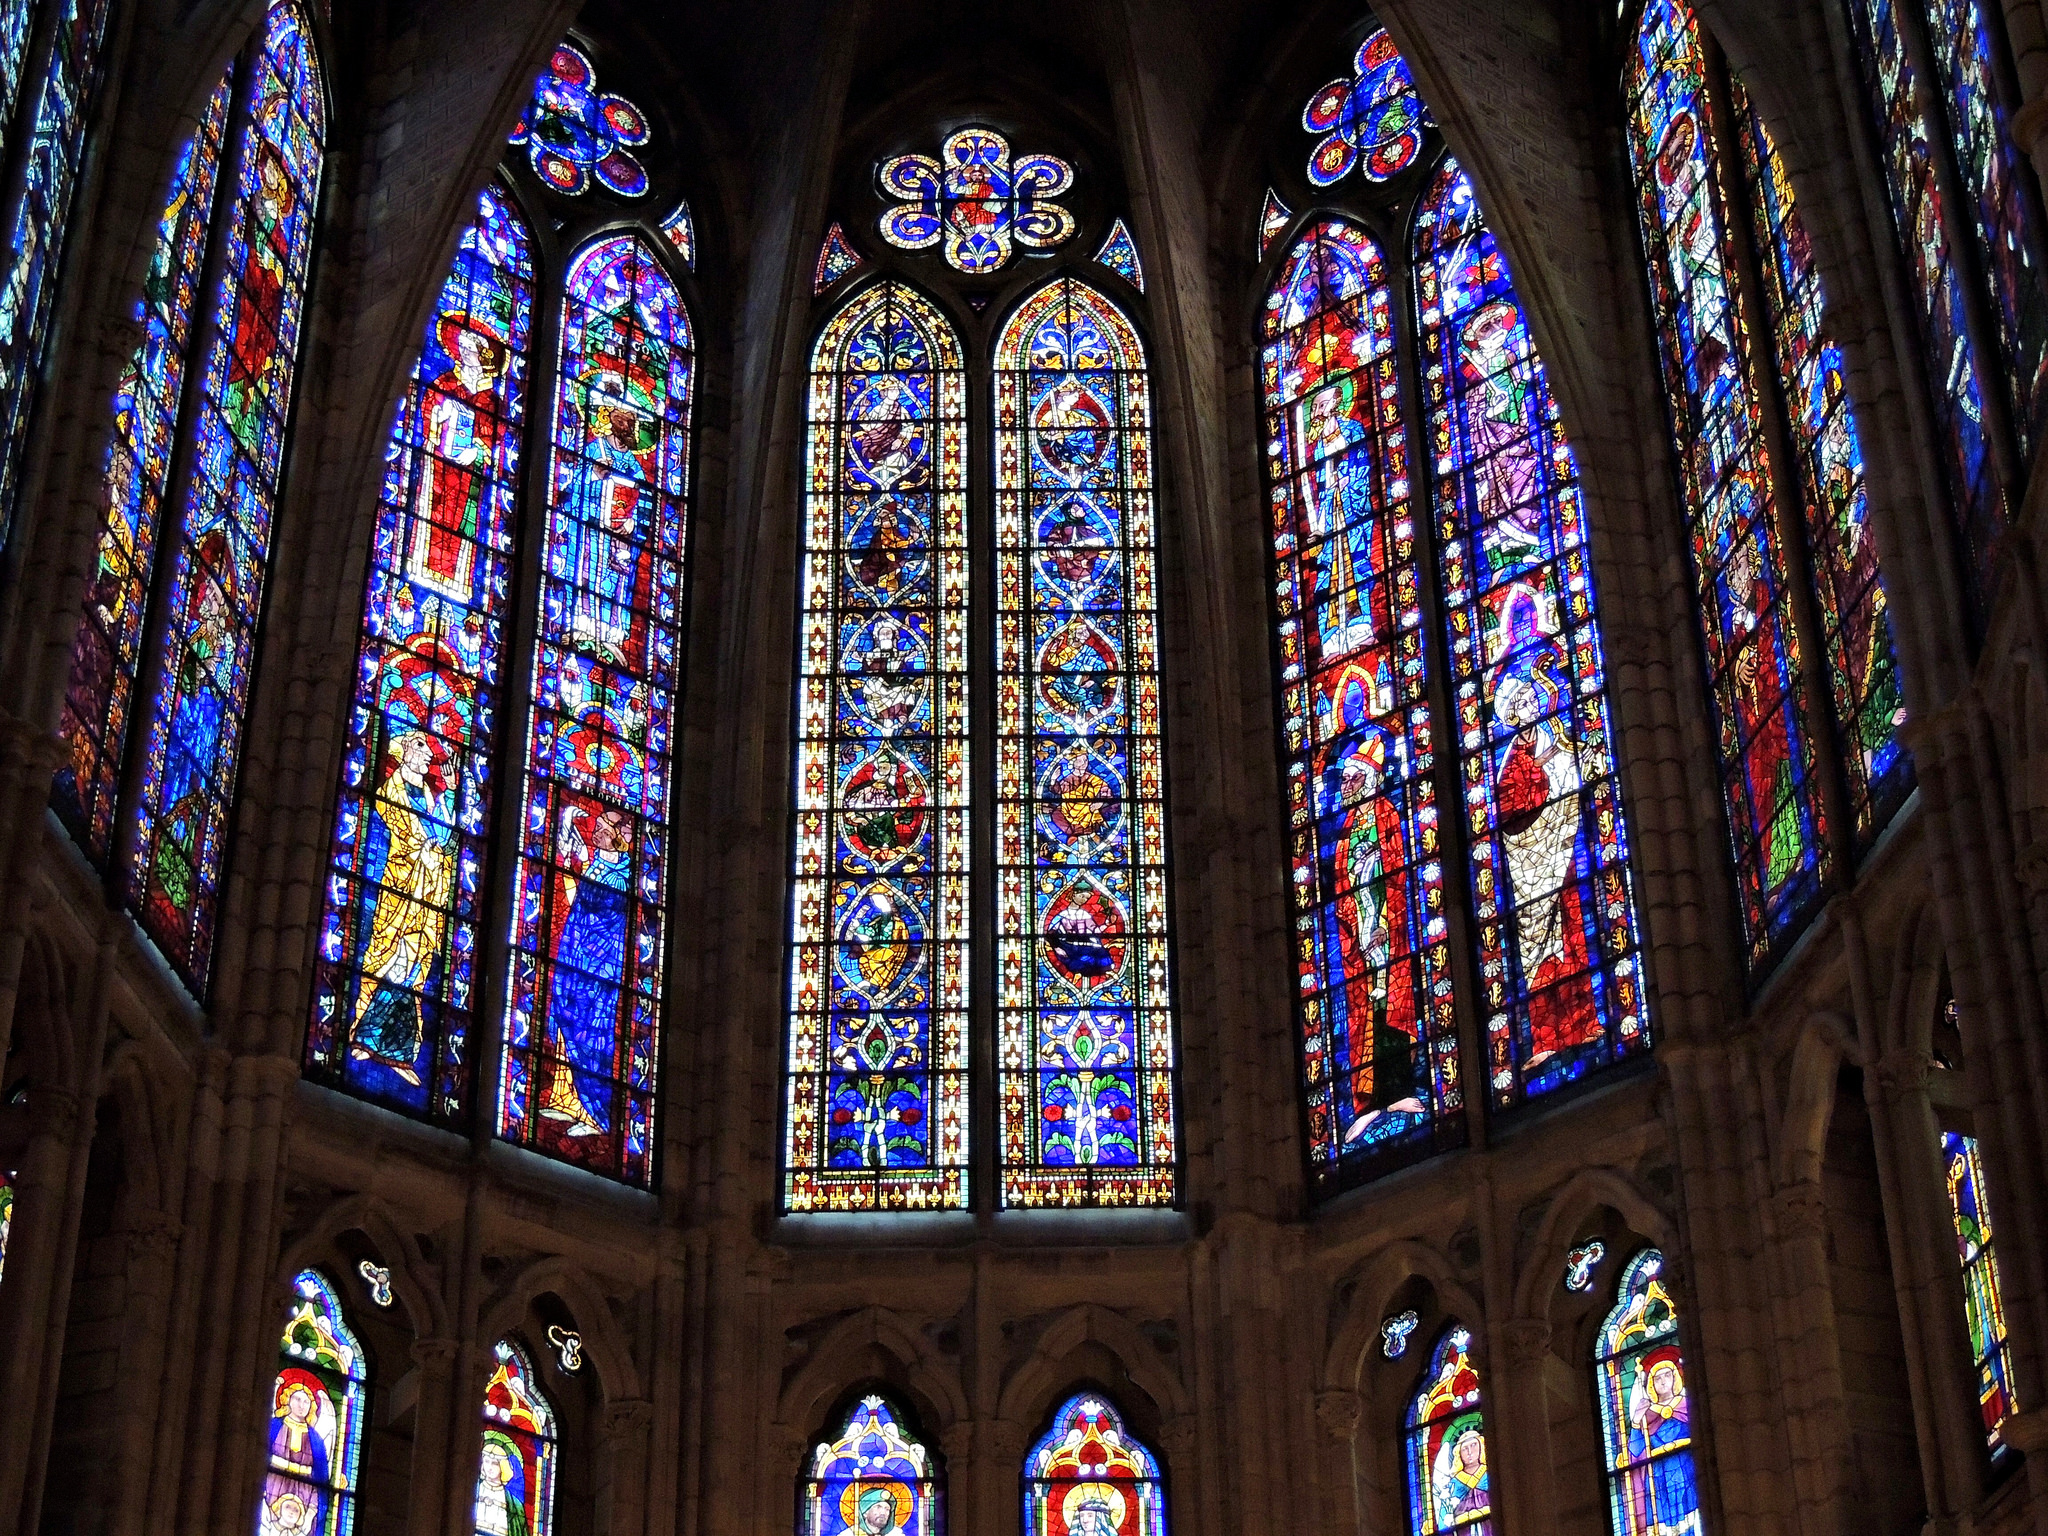 Stained glass window of the Cathedral of León